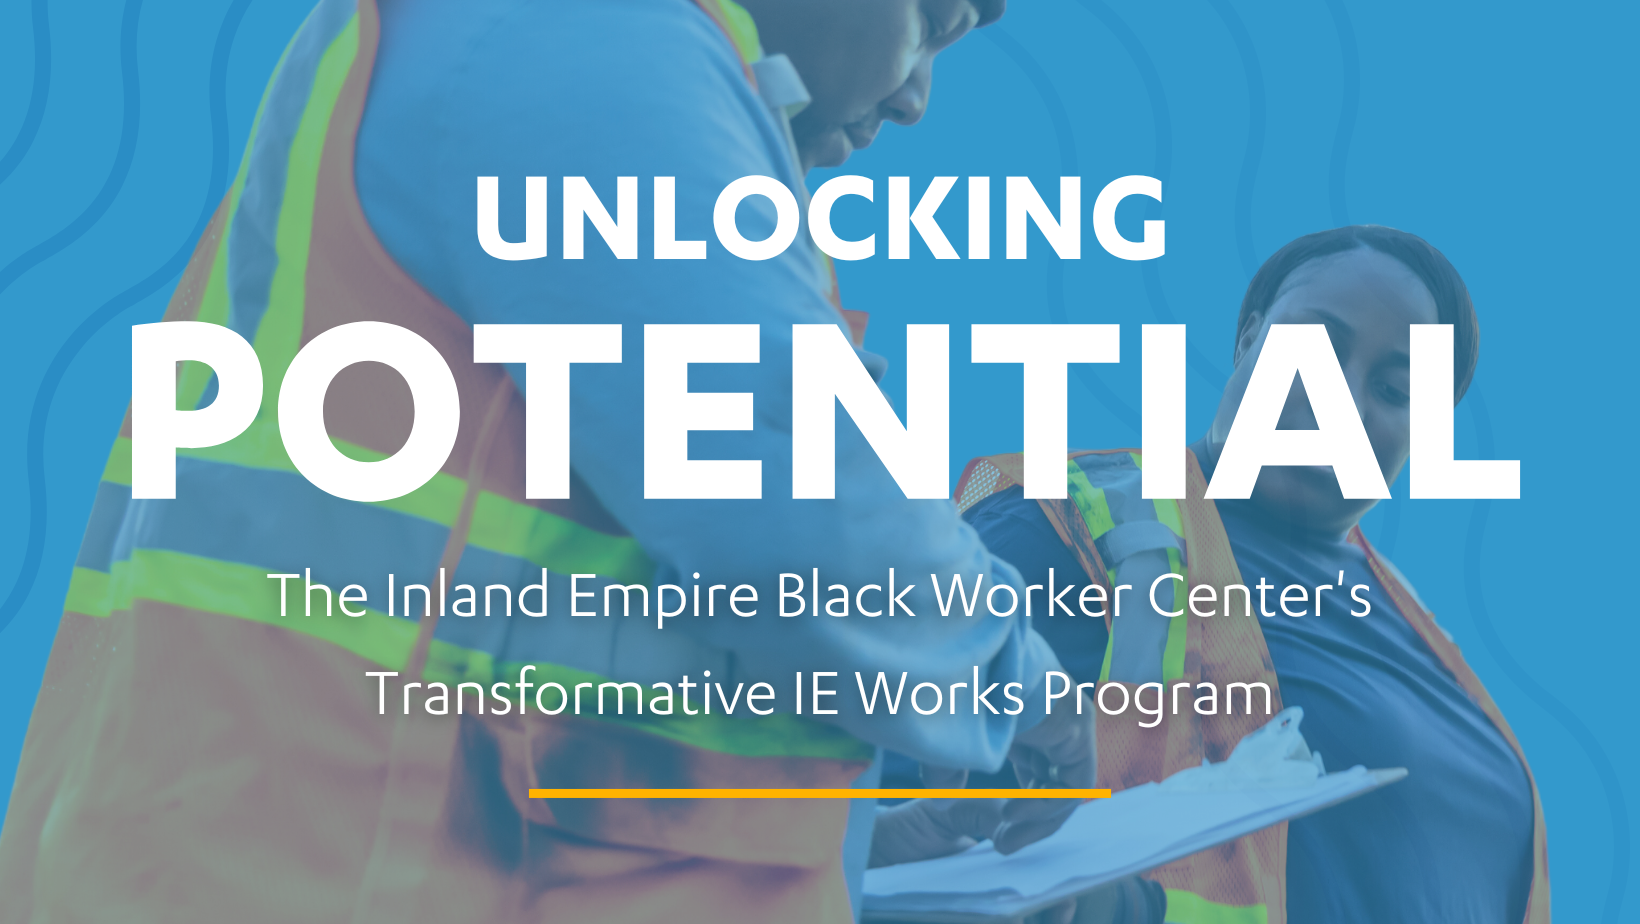 New Report Showcases Pre-Apprenticeship Program for Black Workers in Inland Empire